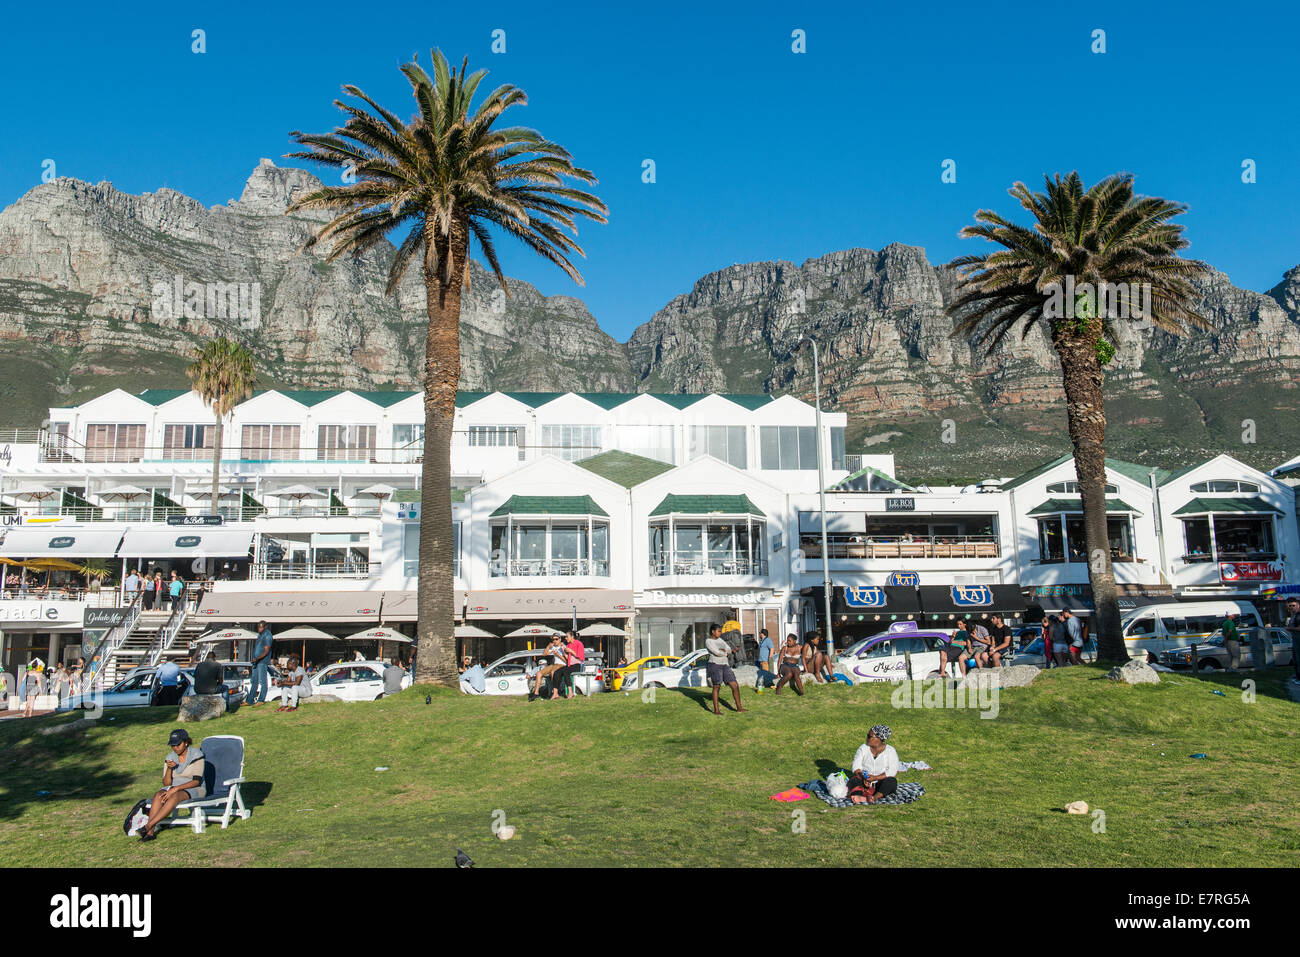 Hotel and Table Mountain, people relaxing, Camps Bay, Cape Town, South Africa Stock Photo